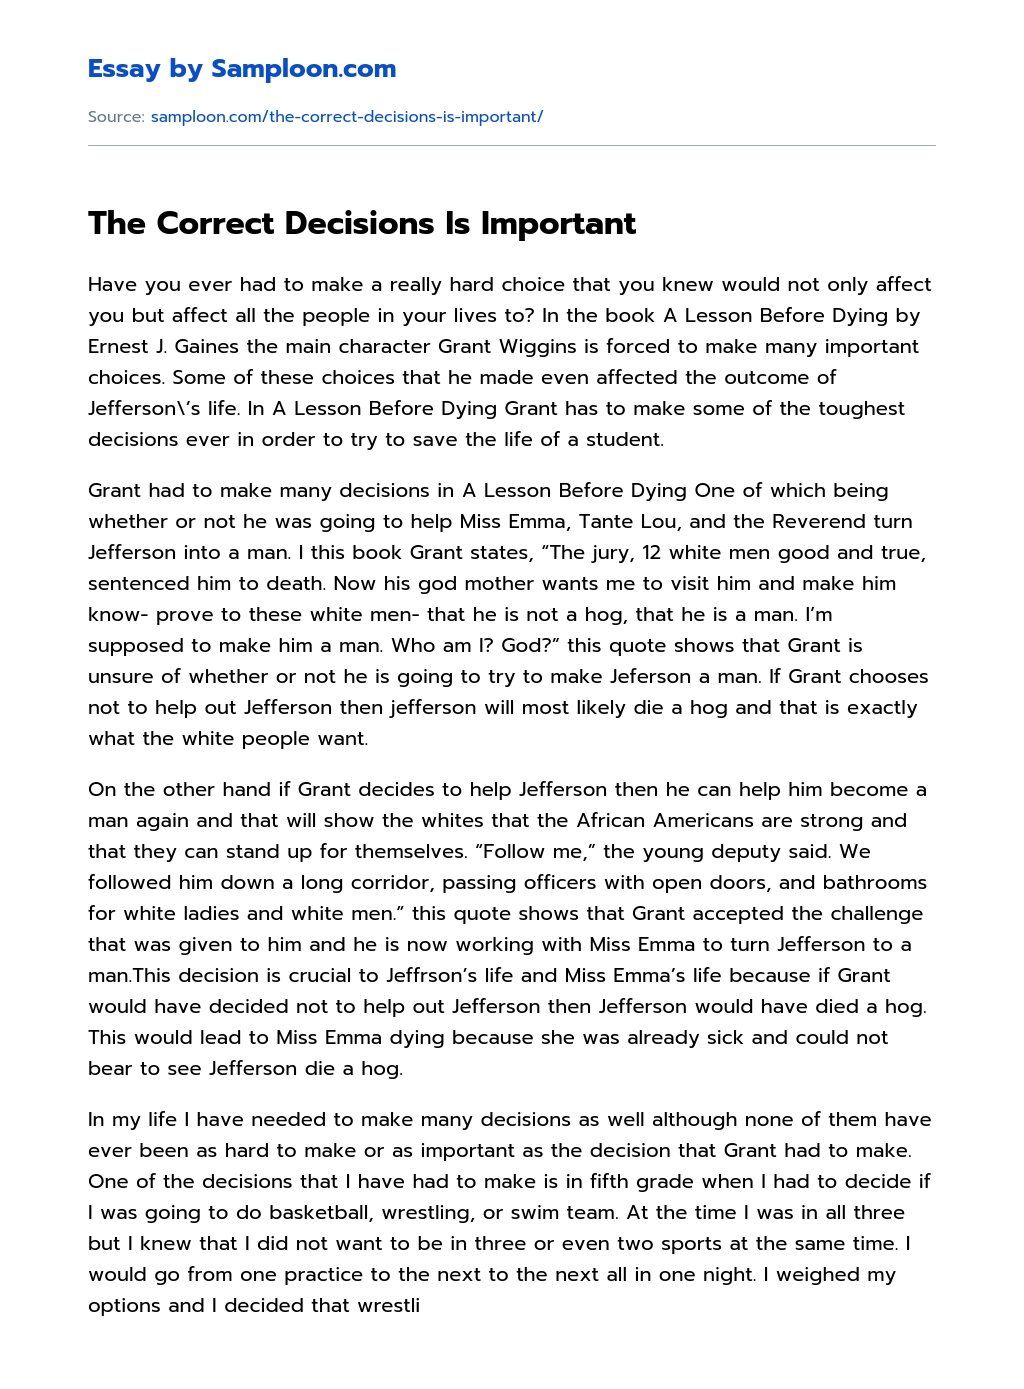 The Correct Decisions Is Important essay